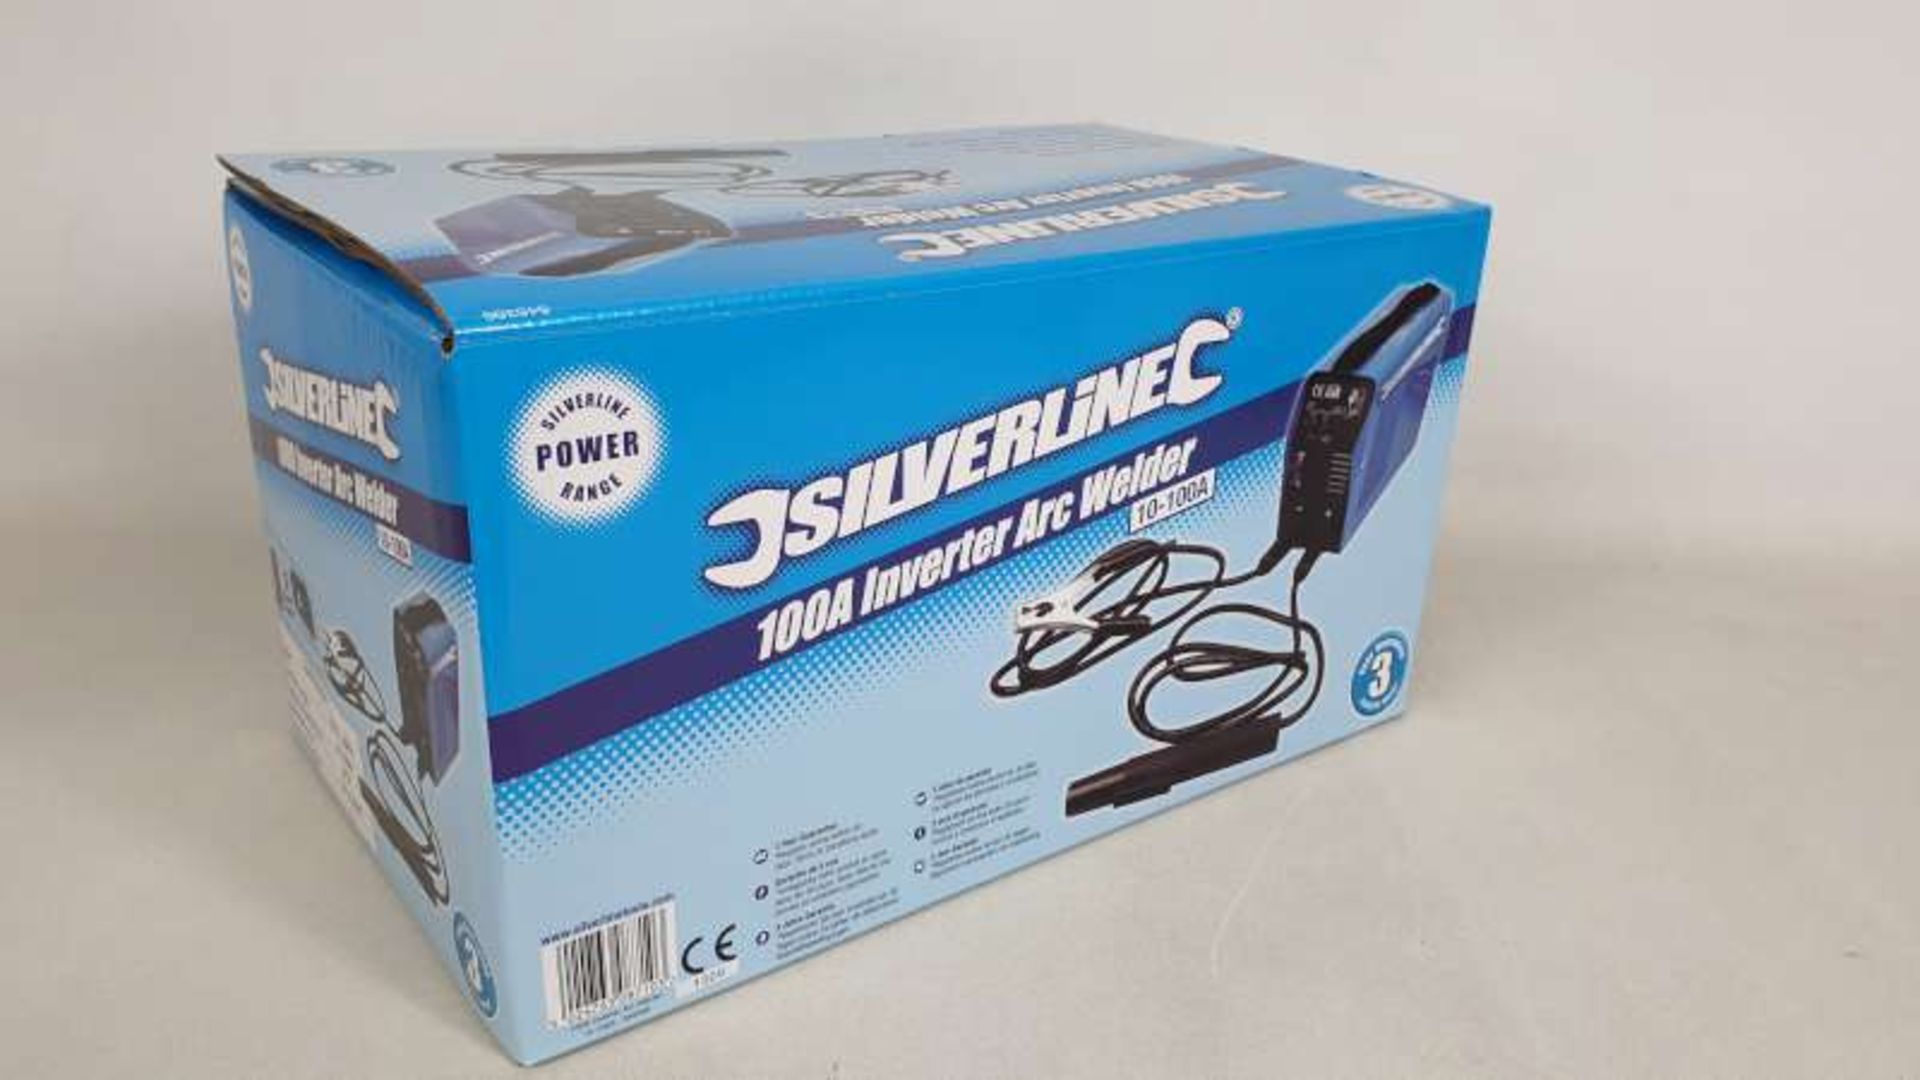 BRAND NEW BOXED SILVERLINE 100A INVERTER ARC WELDER WITH 3 YEARS MANUFACTURERS GUARANTEE